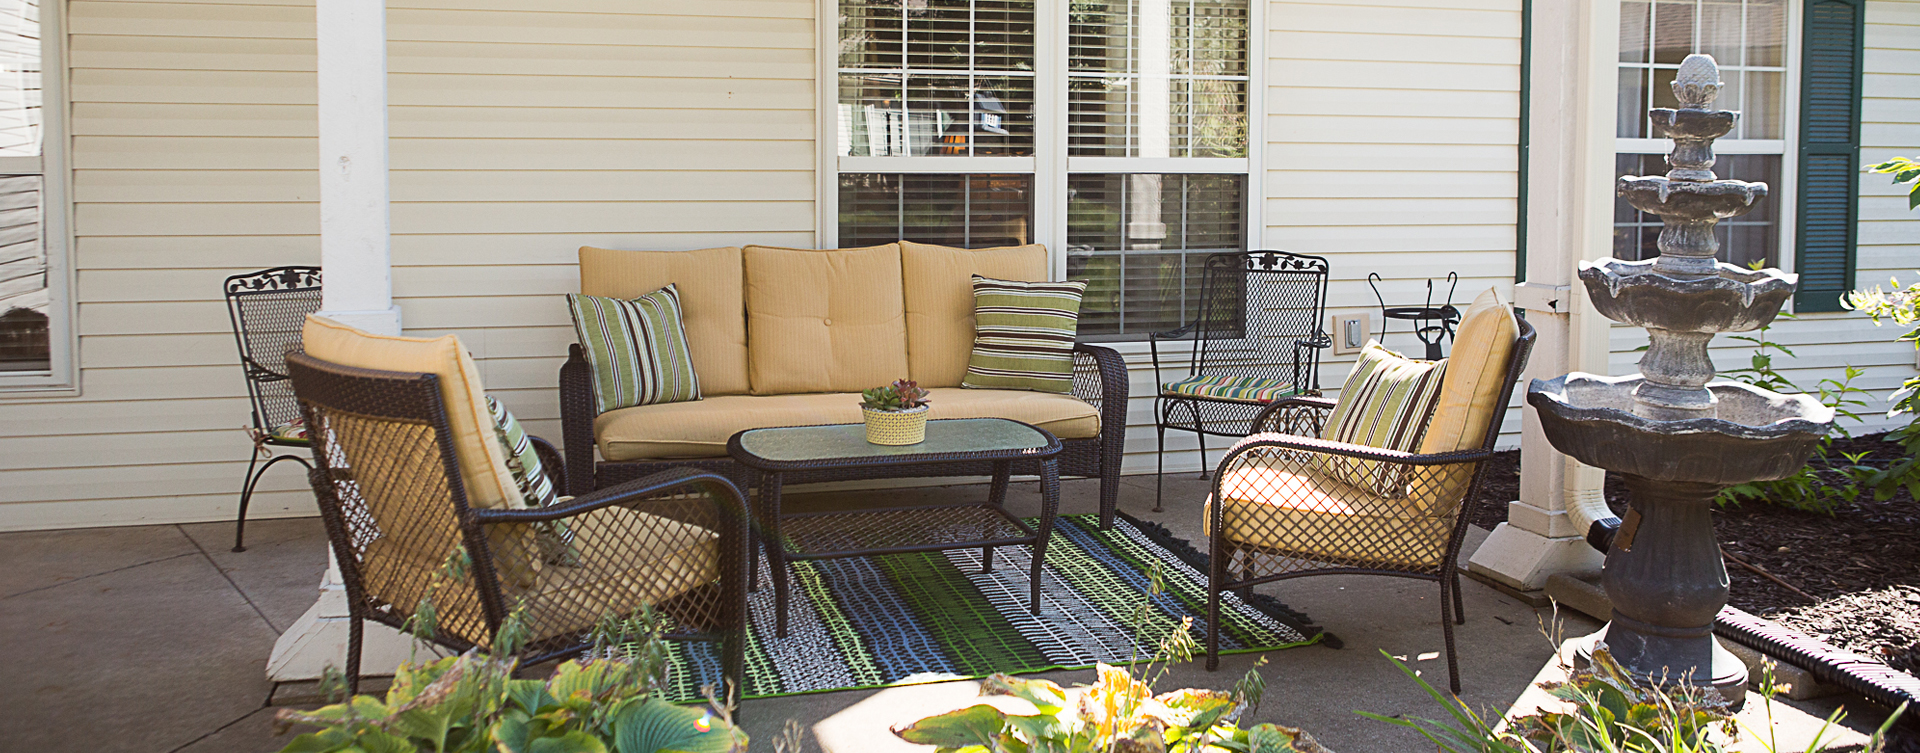 Enjoy conversations with friends on the porch at Bickford of Muscatine